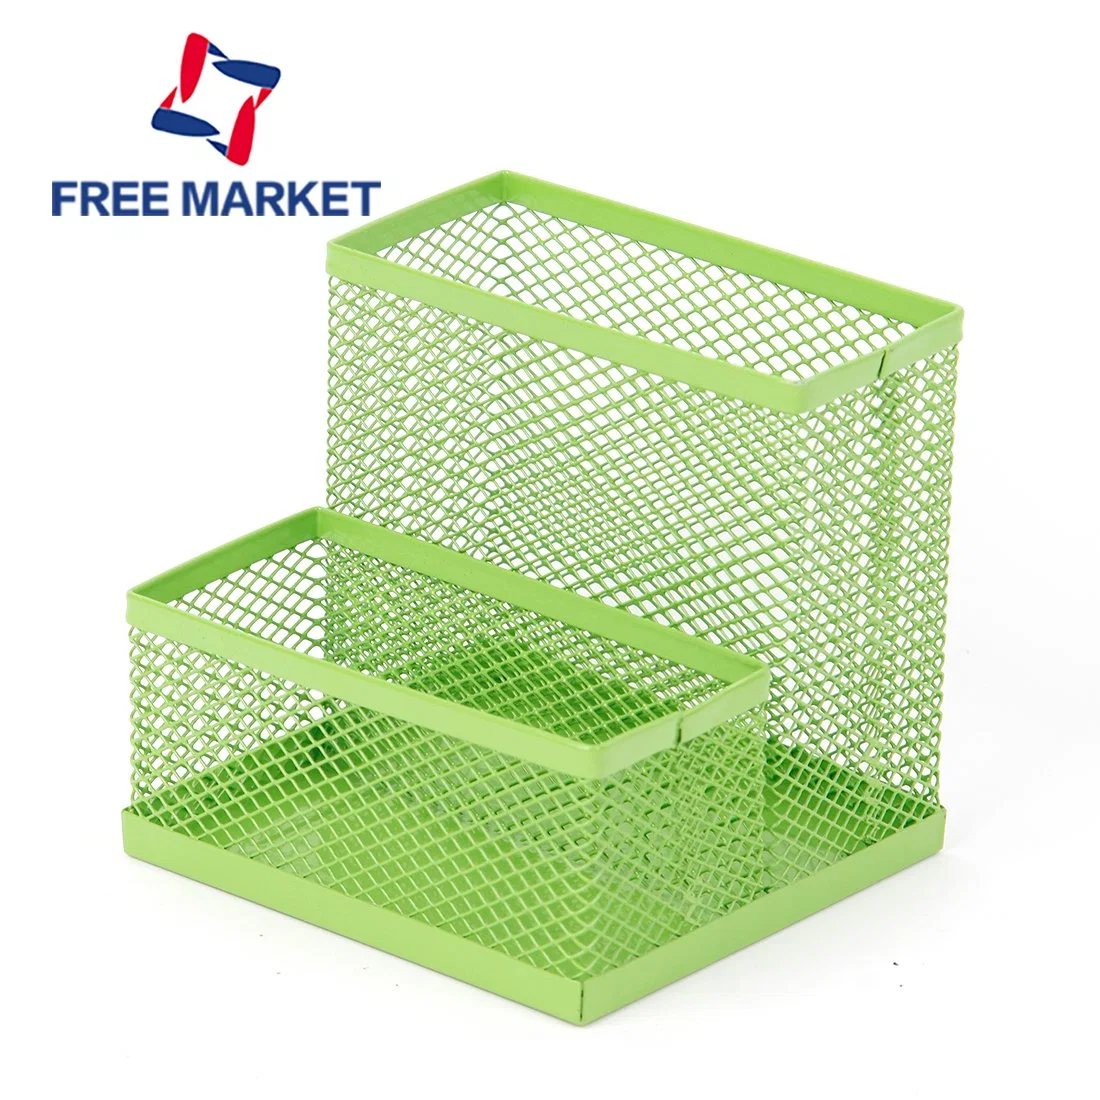 Desk Drawer Organizer Metal Mesh Drawer Organizer Tray for Office or Home Supplies Desktop Storage Stationery, 2 Compartments